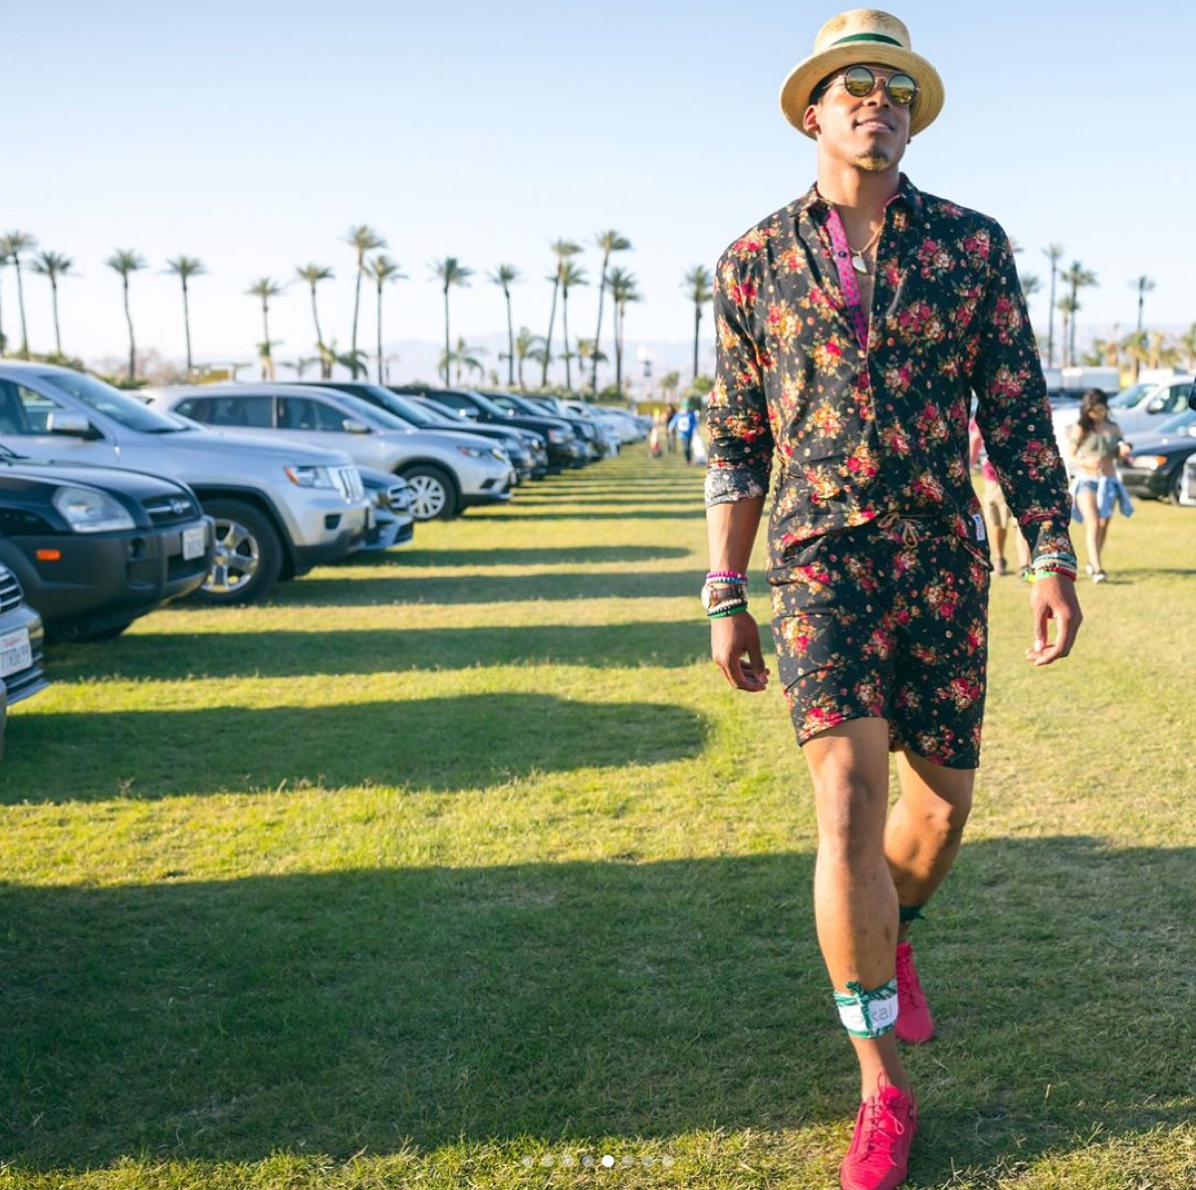 Is The World Ready for Men in Rompers?